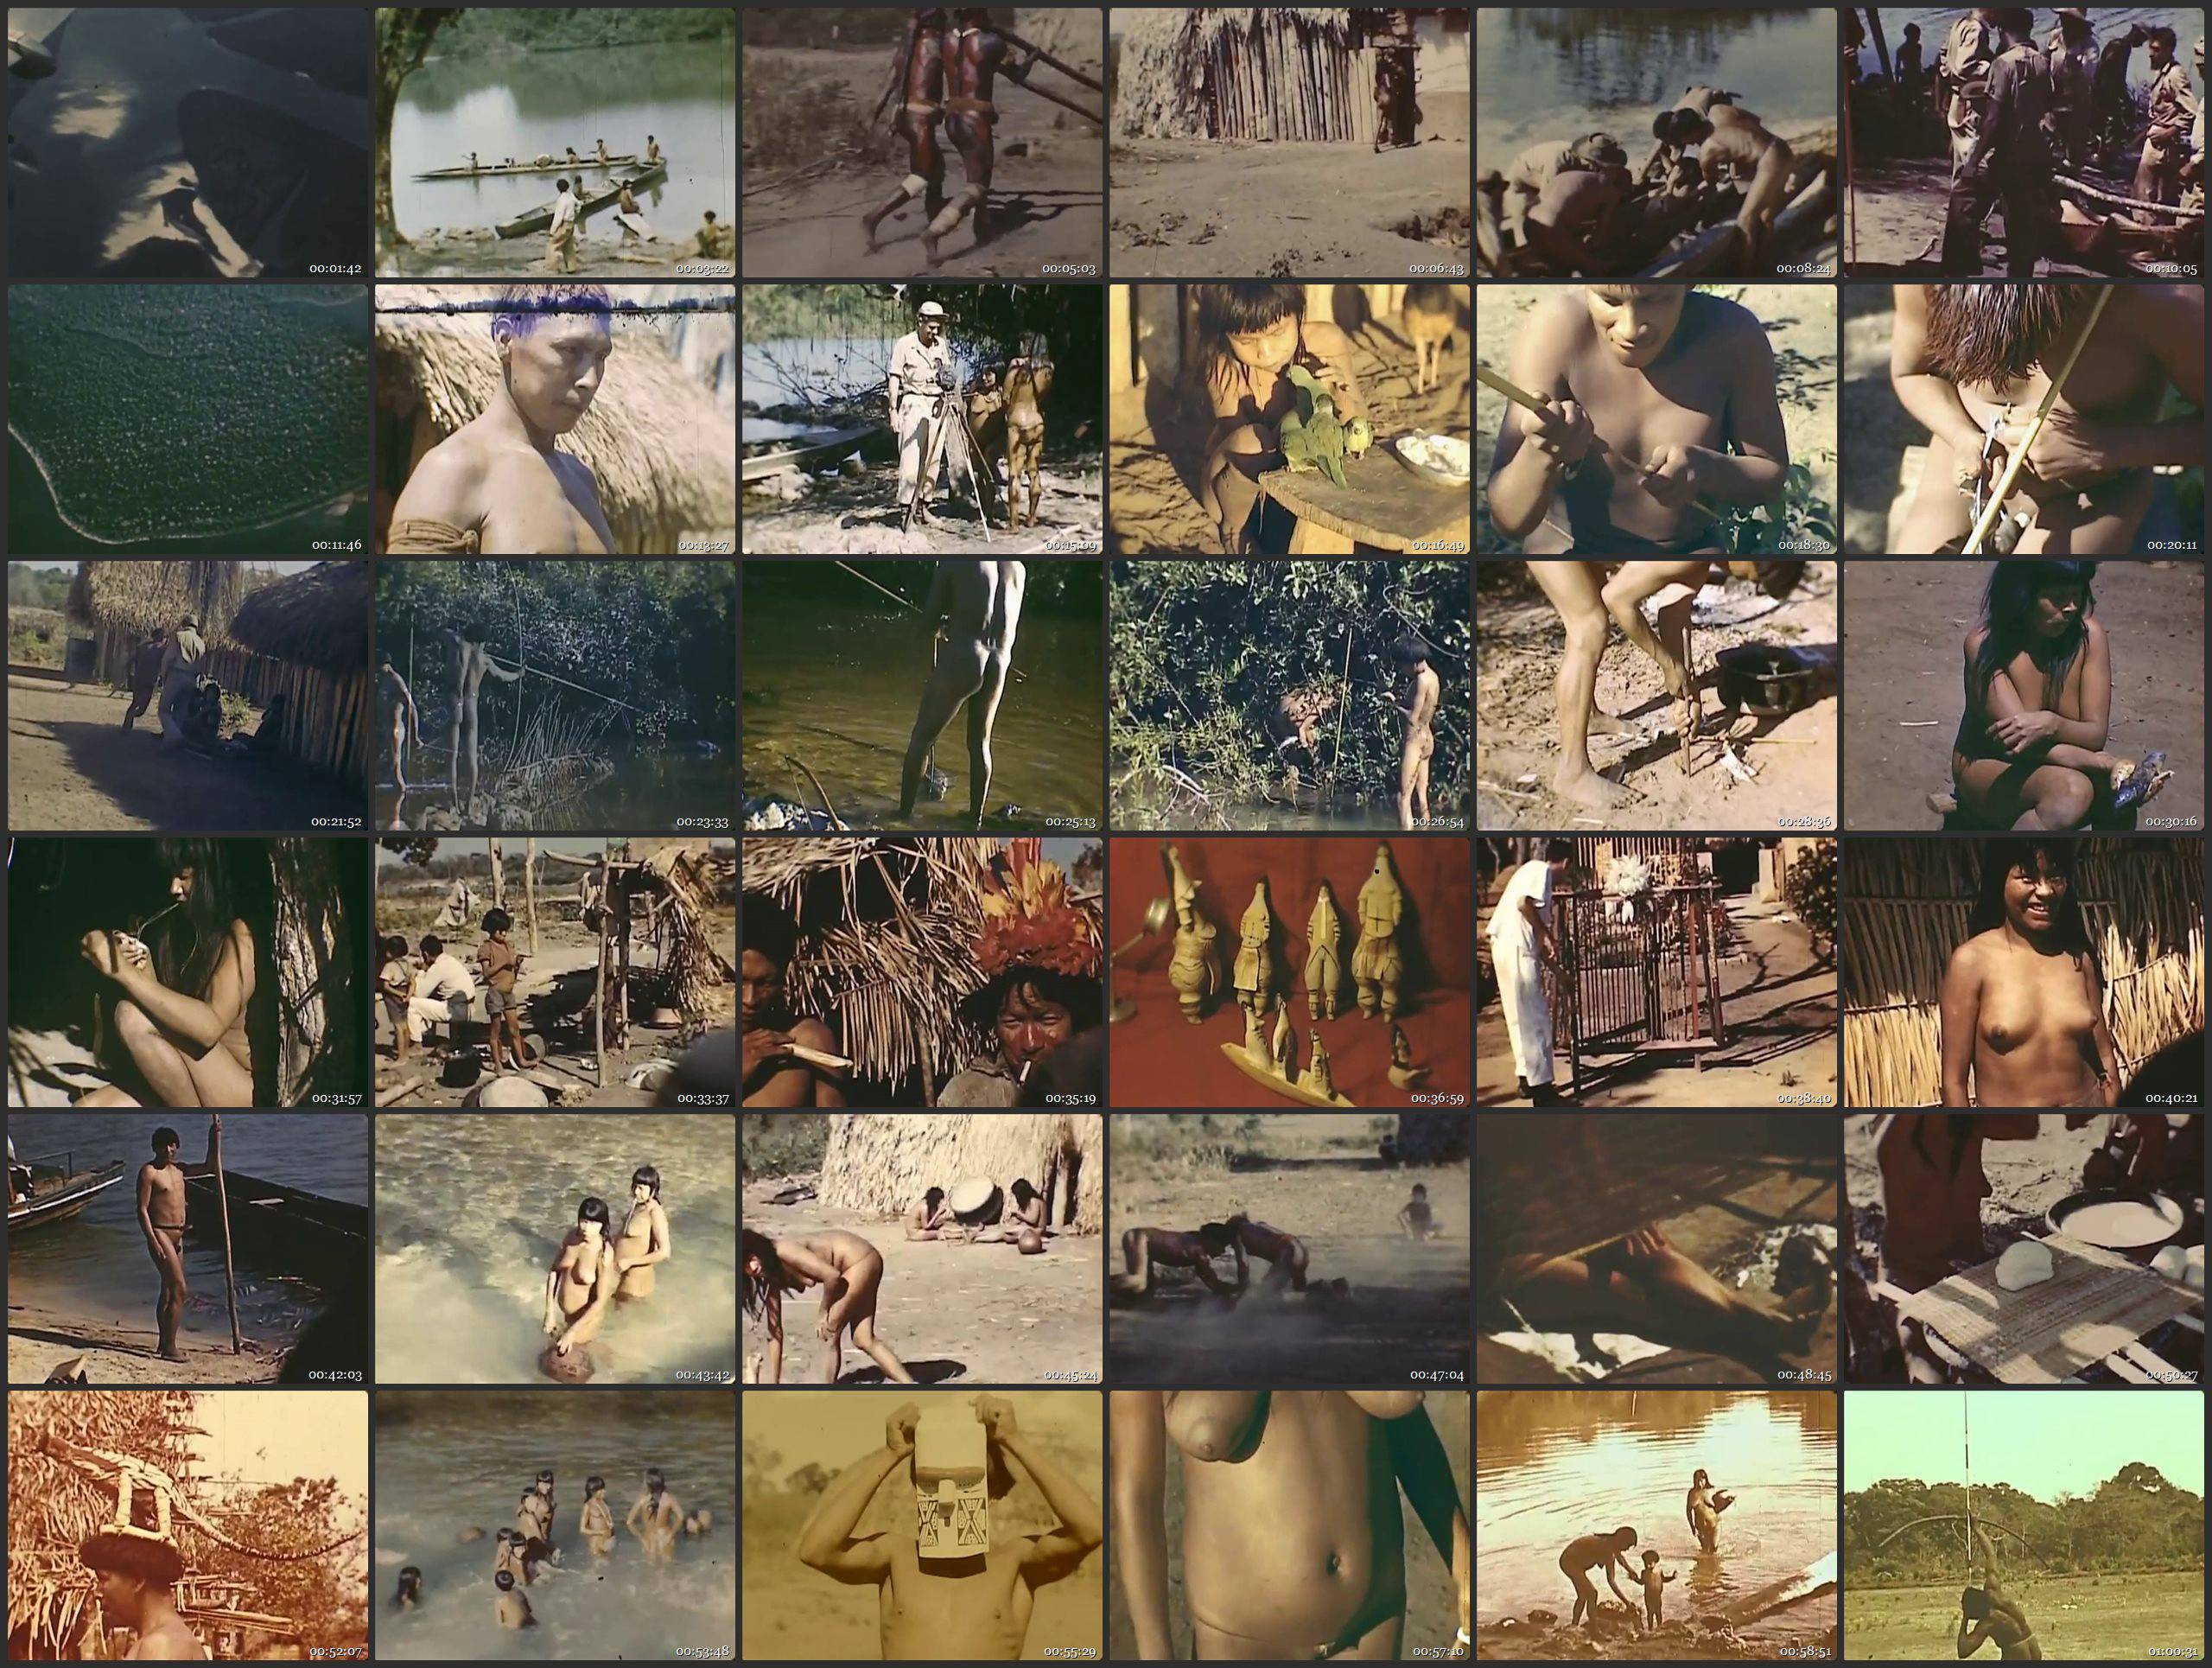 Xingu Indians - Expedition to rainforests of Brazil in 1948 - Thumbnails